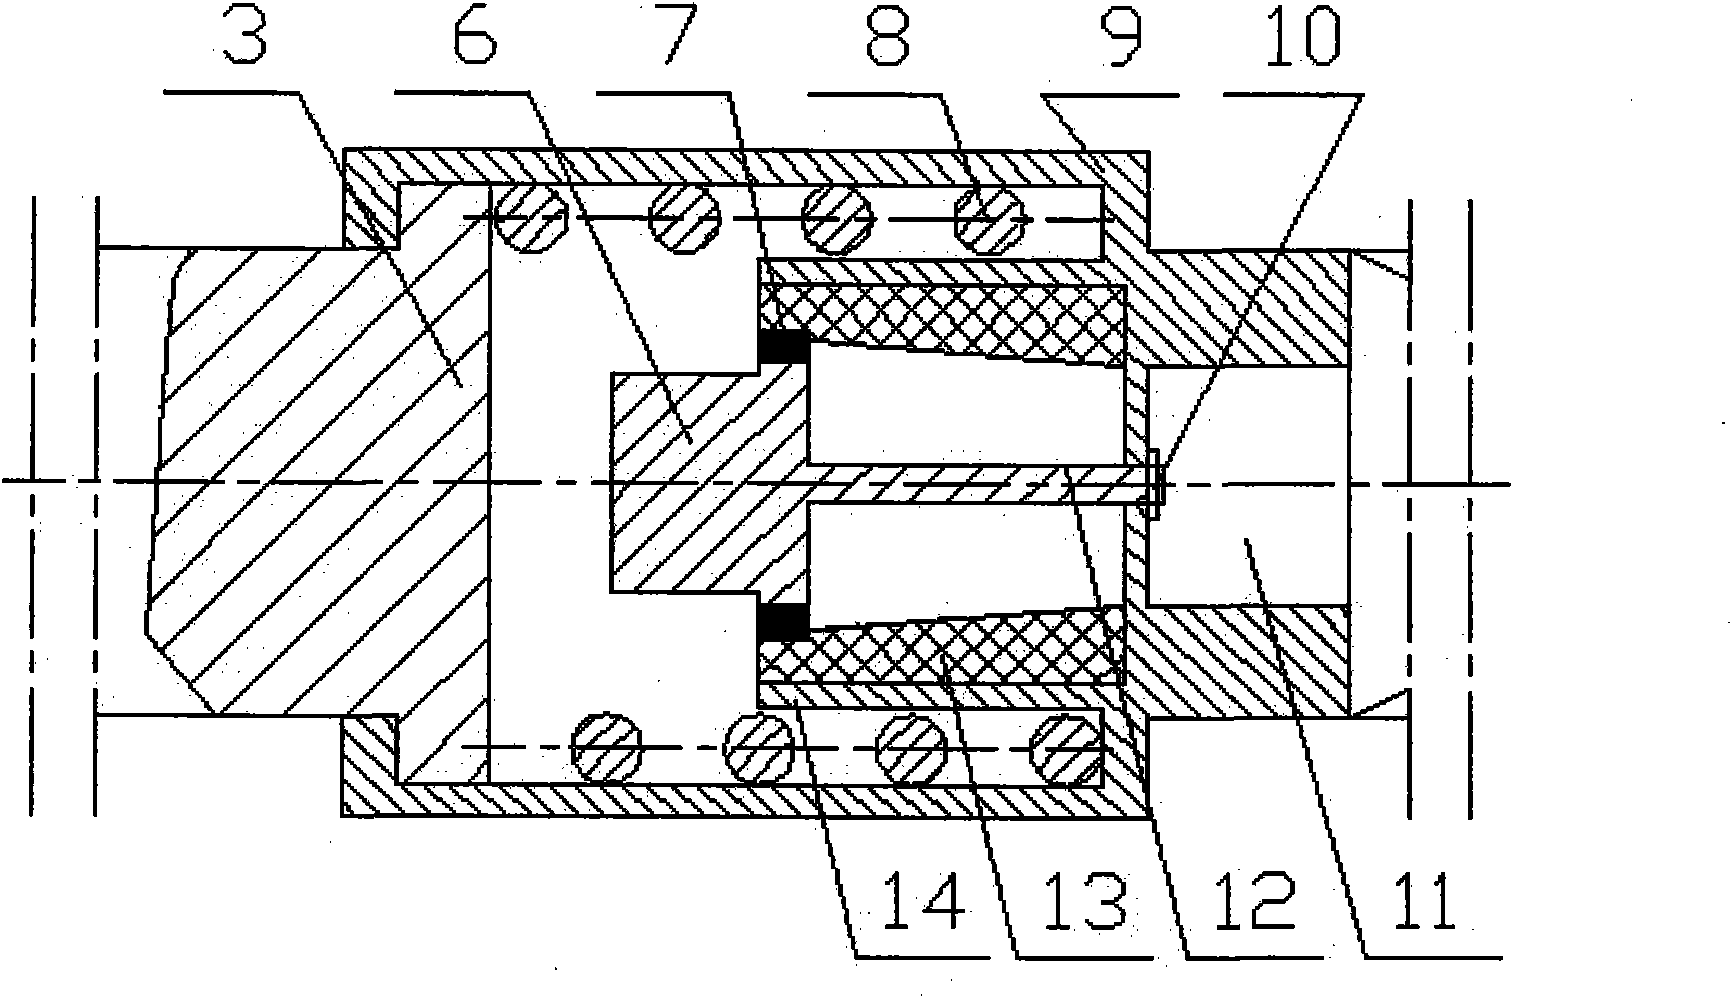 Coupler buffer device with cutting type energy-absorbing bumper